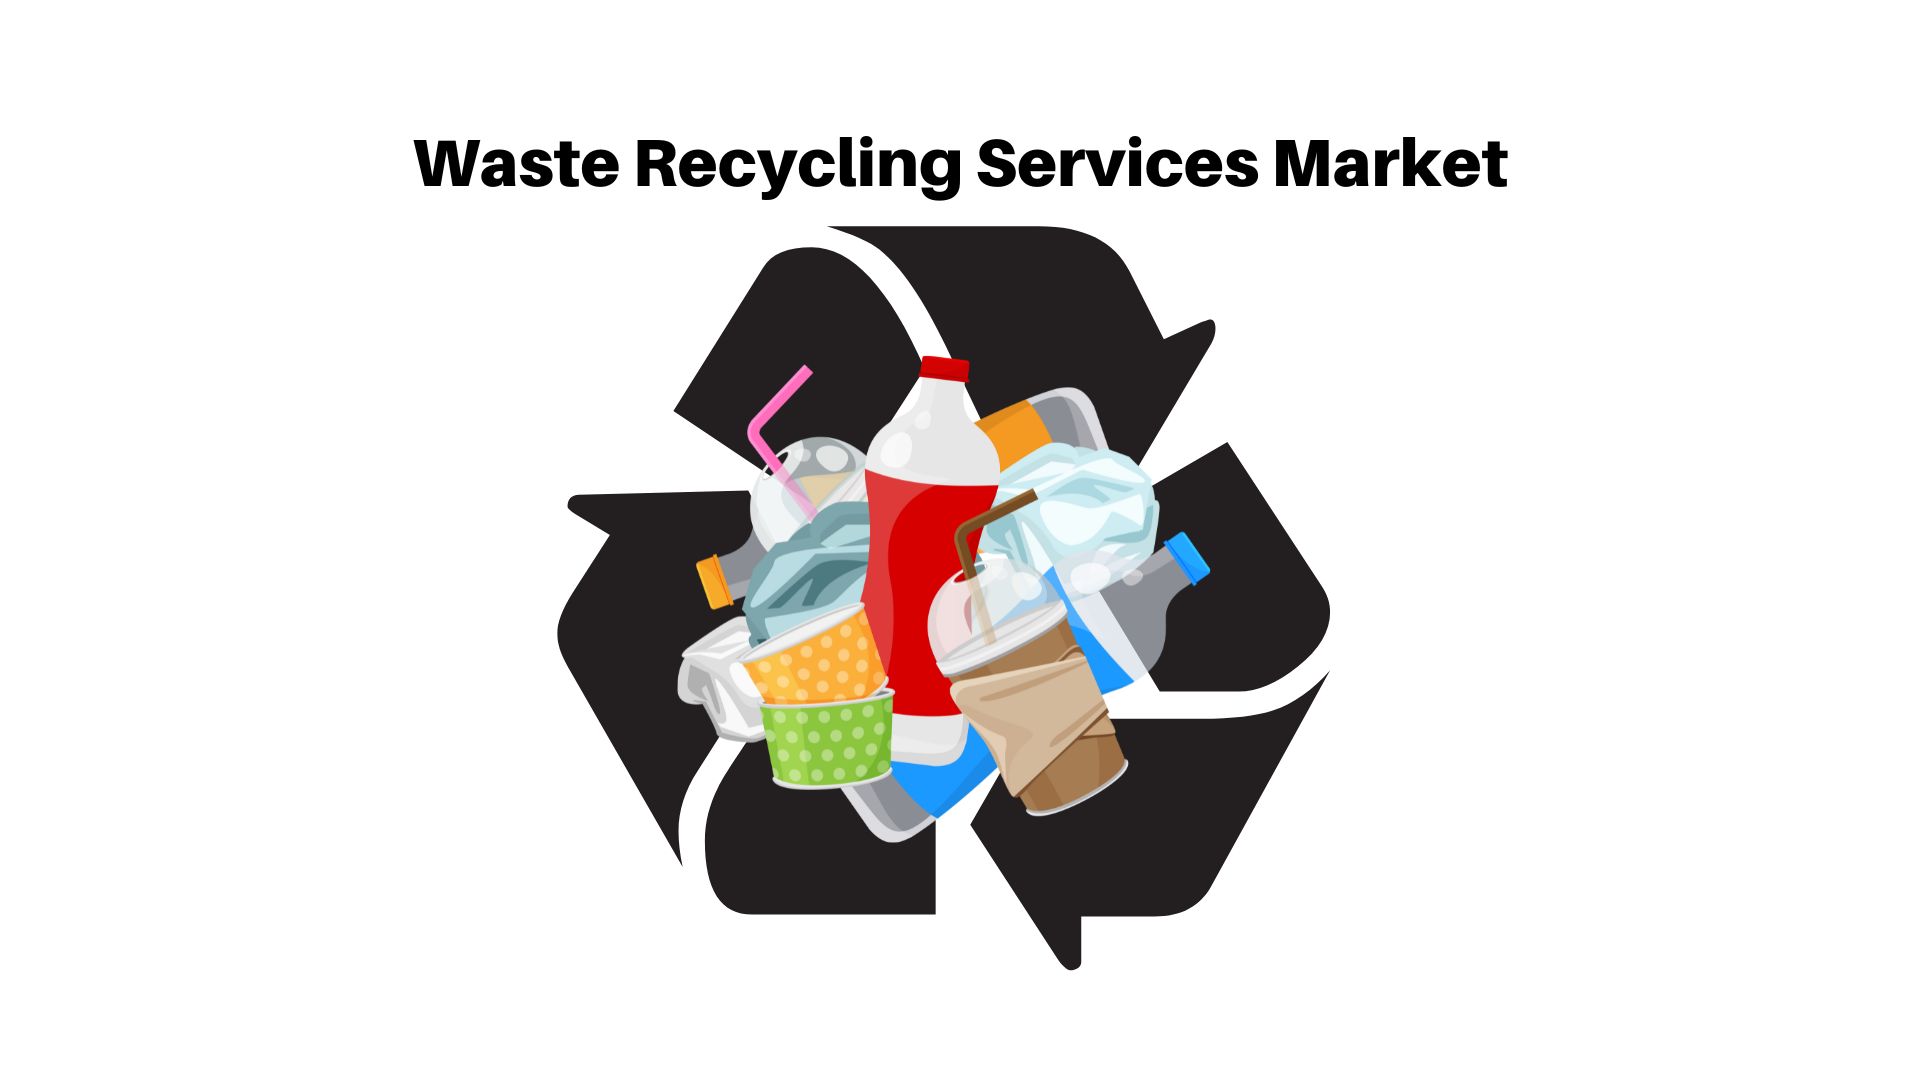 Waste Recycling Services Market To Develop Strongly And Cross USD 96.6 Billion By 2032